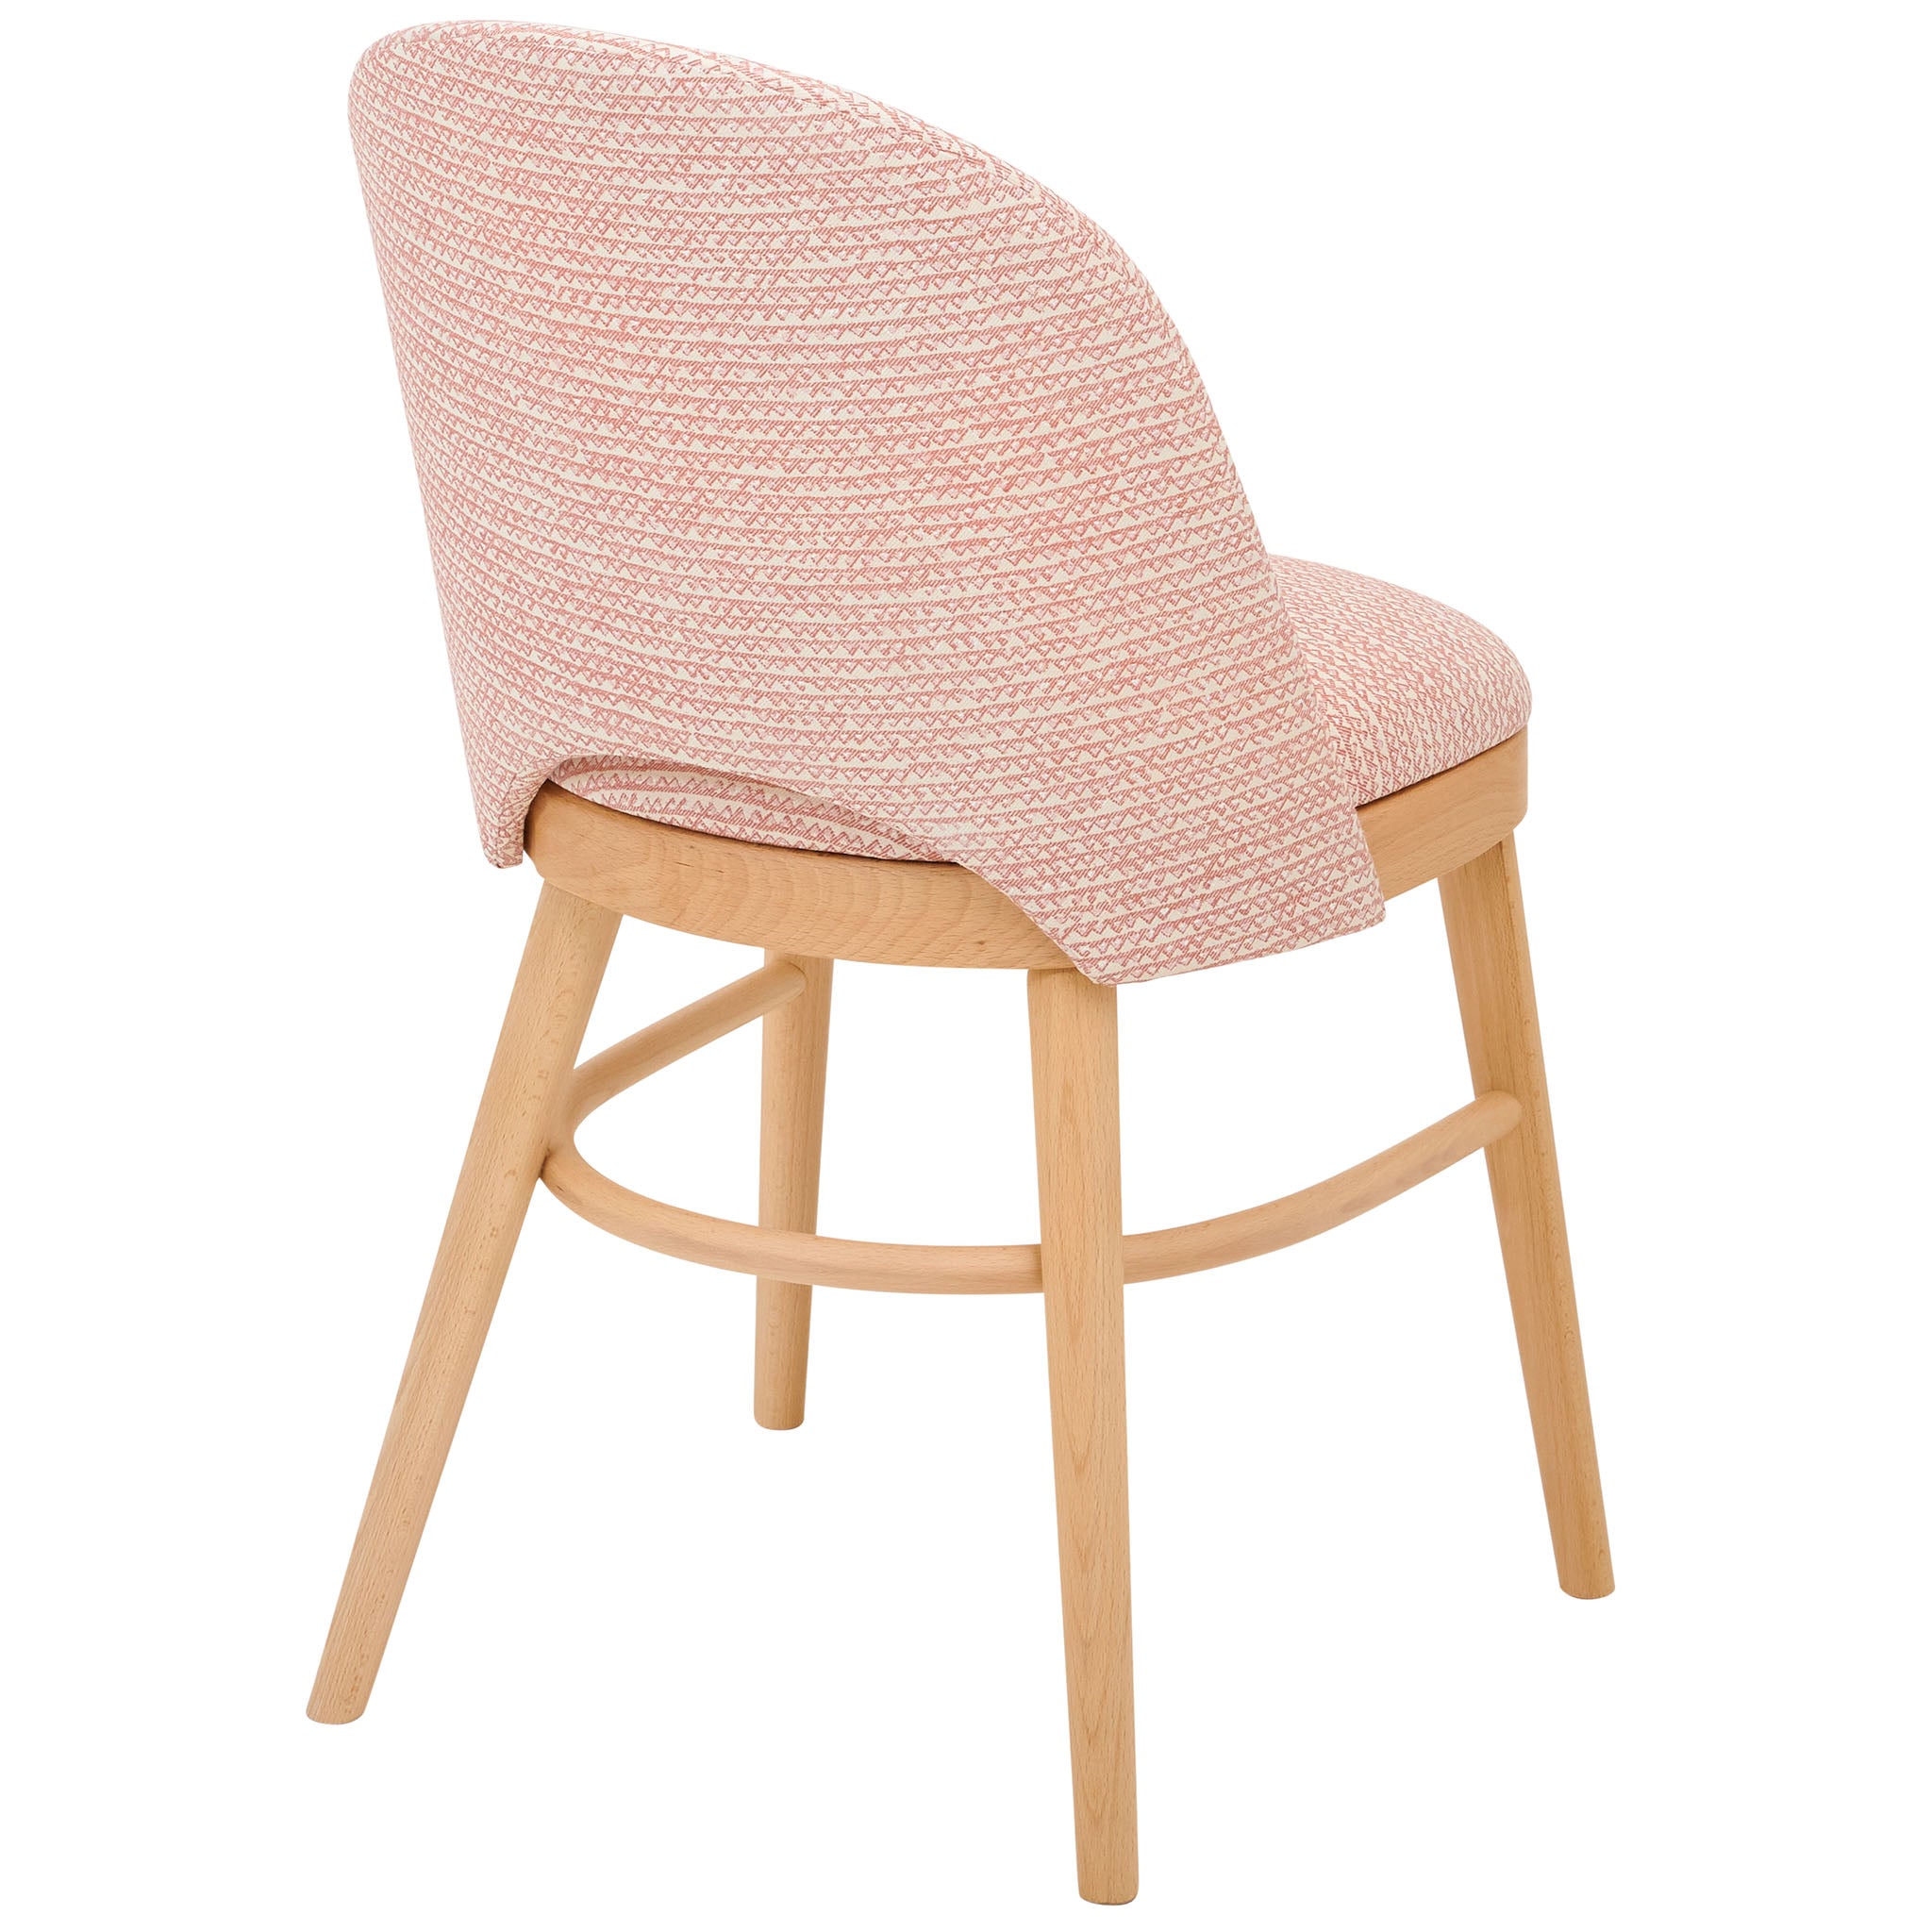 Ella Chair upholstered in Mendip from Fermoie